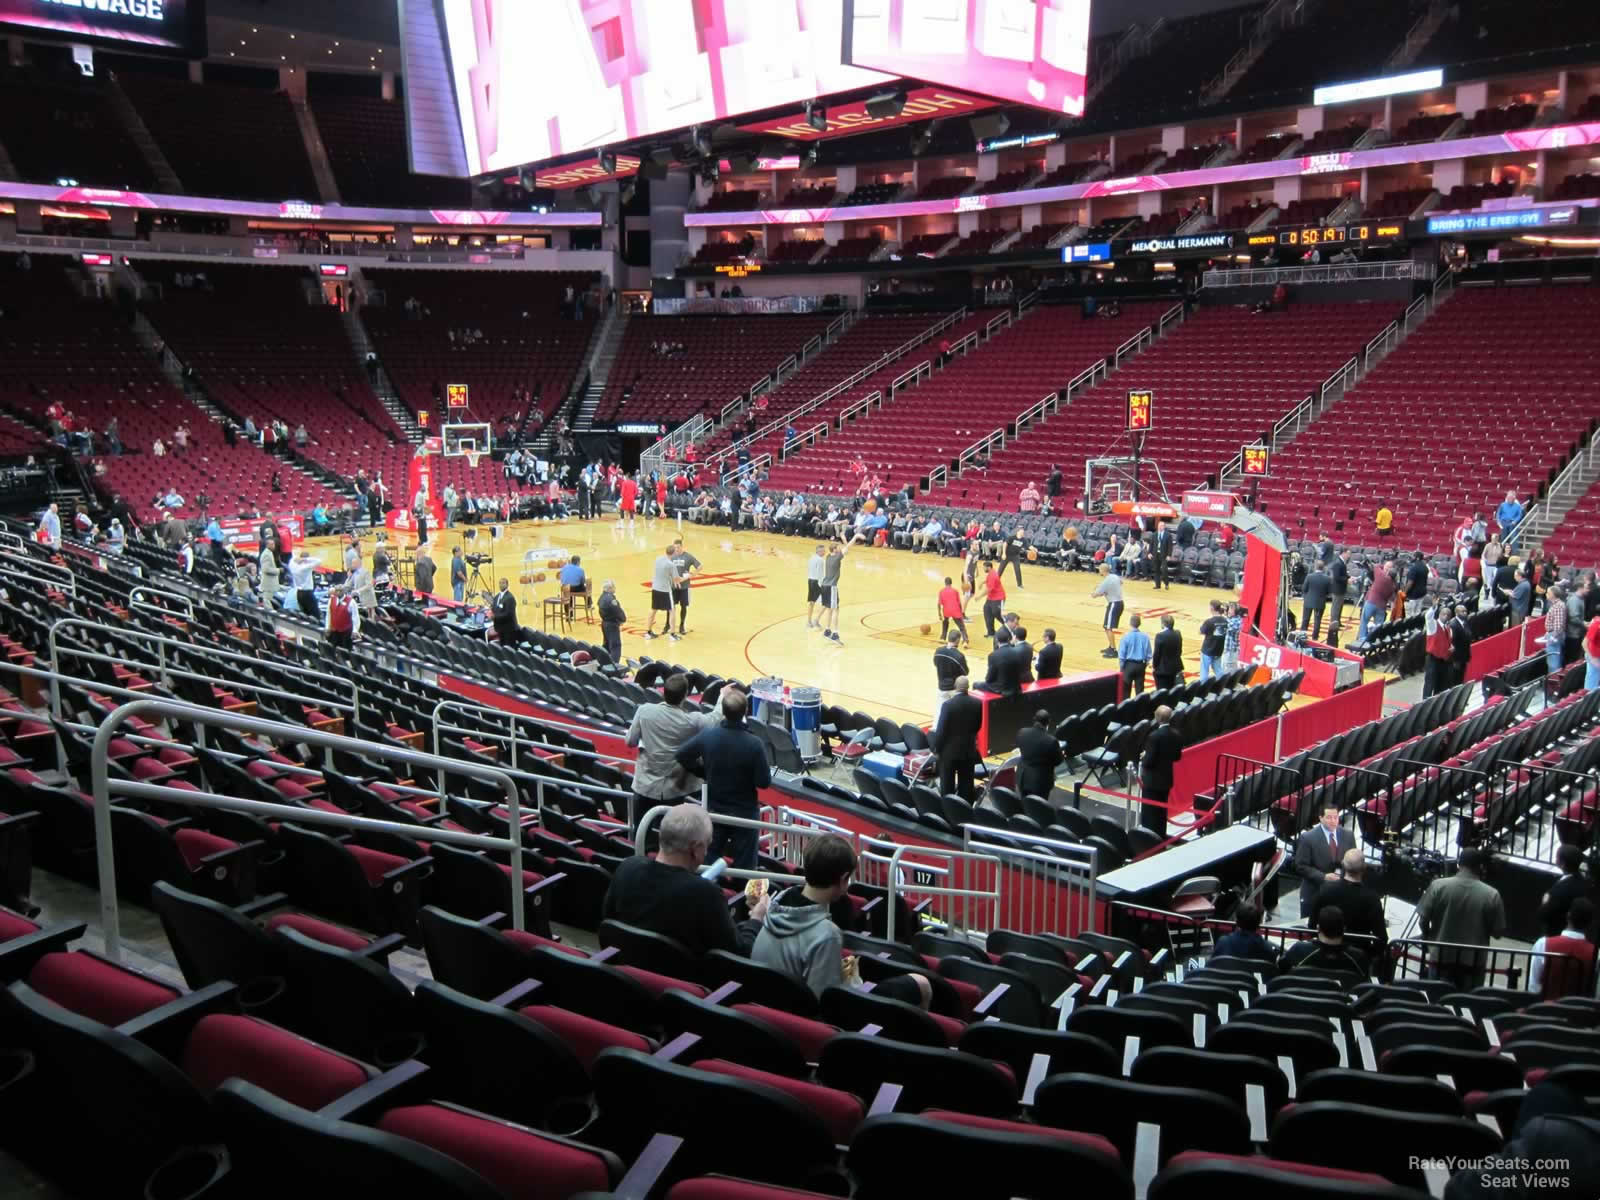 Section 116 at Toyota Center - RateYourSeats.com